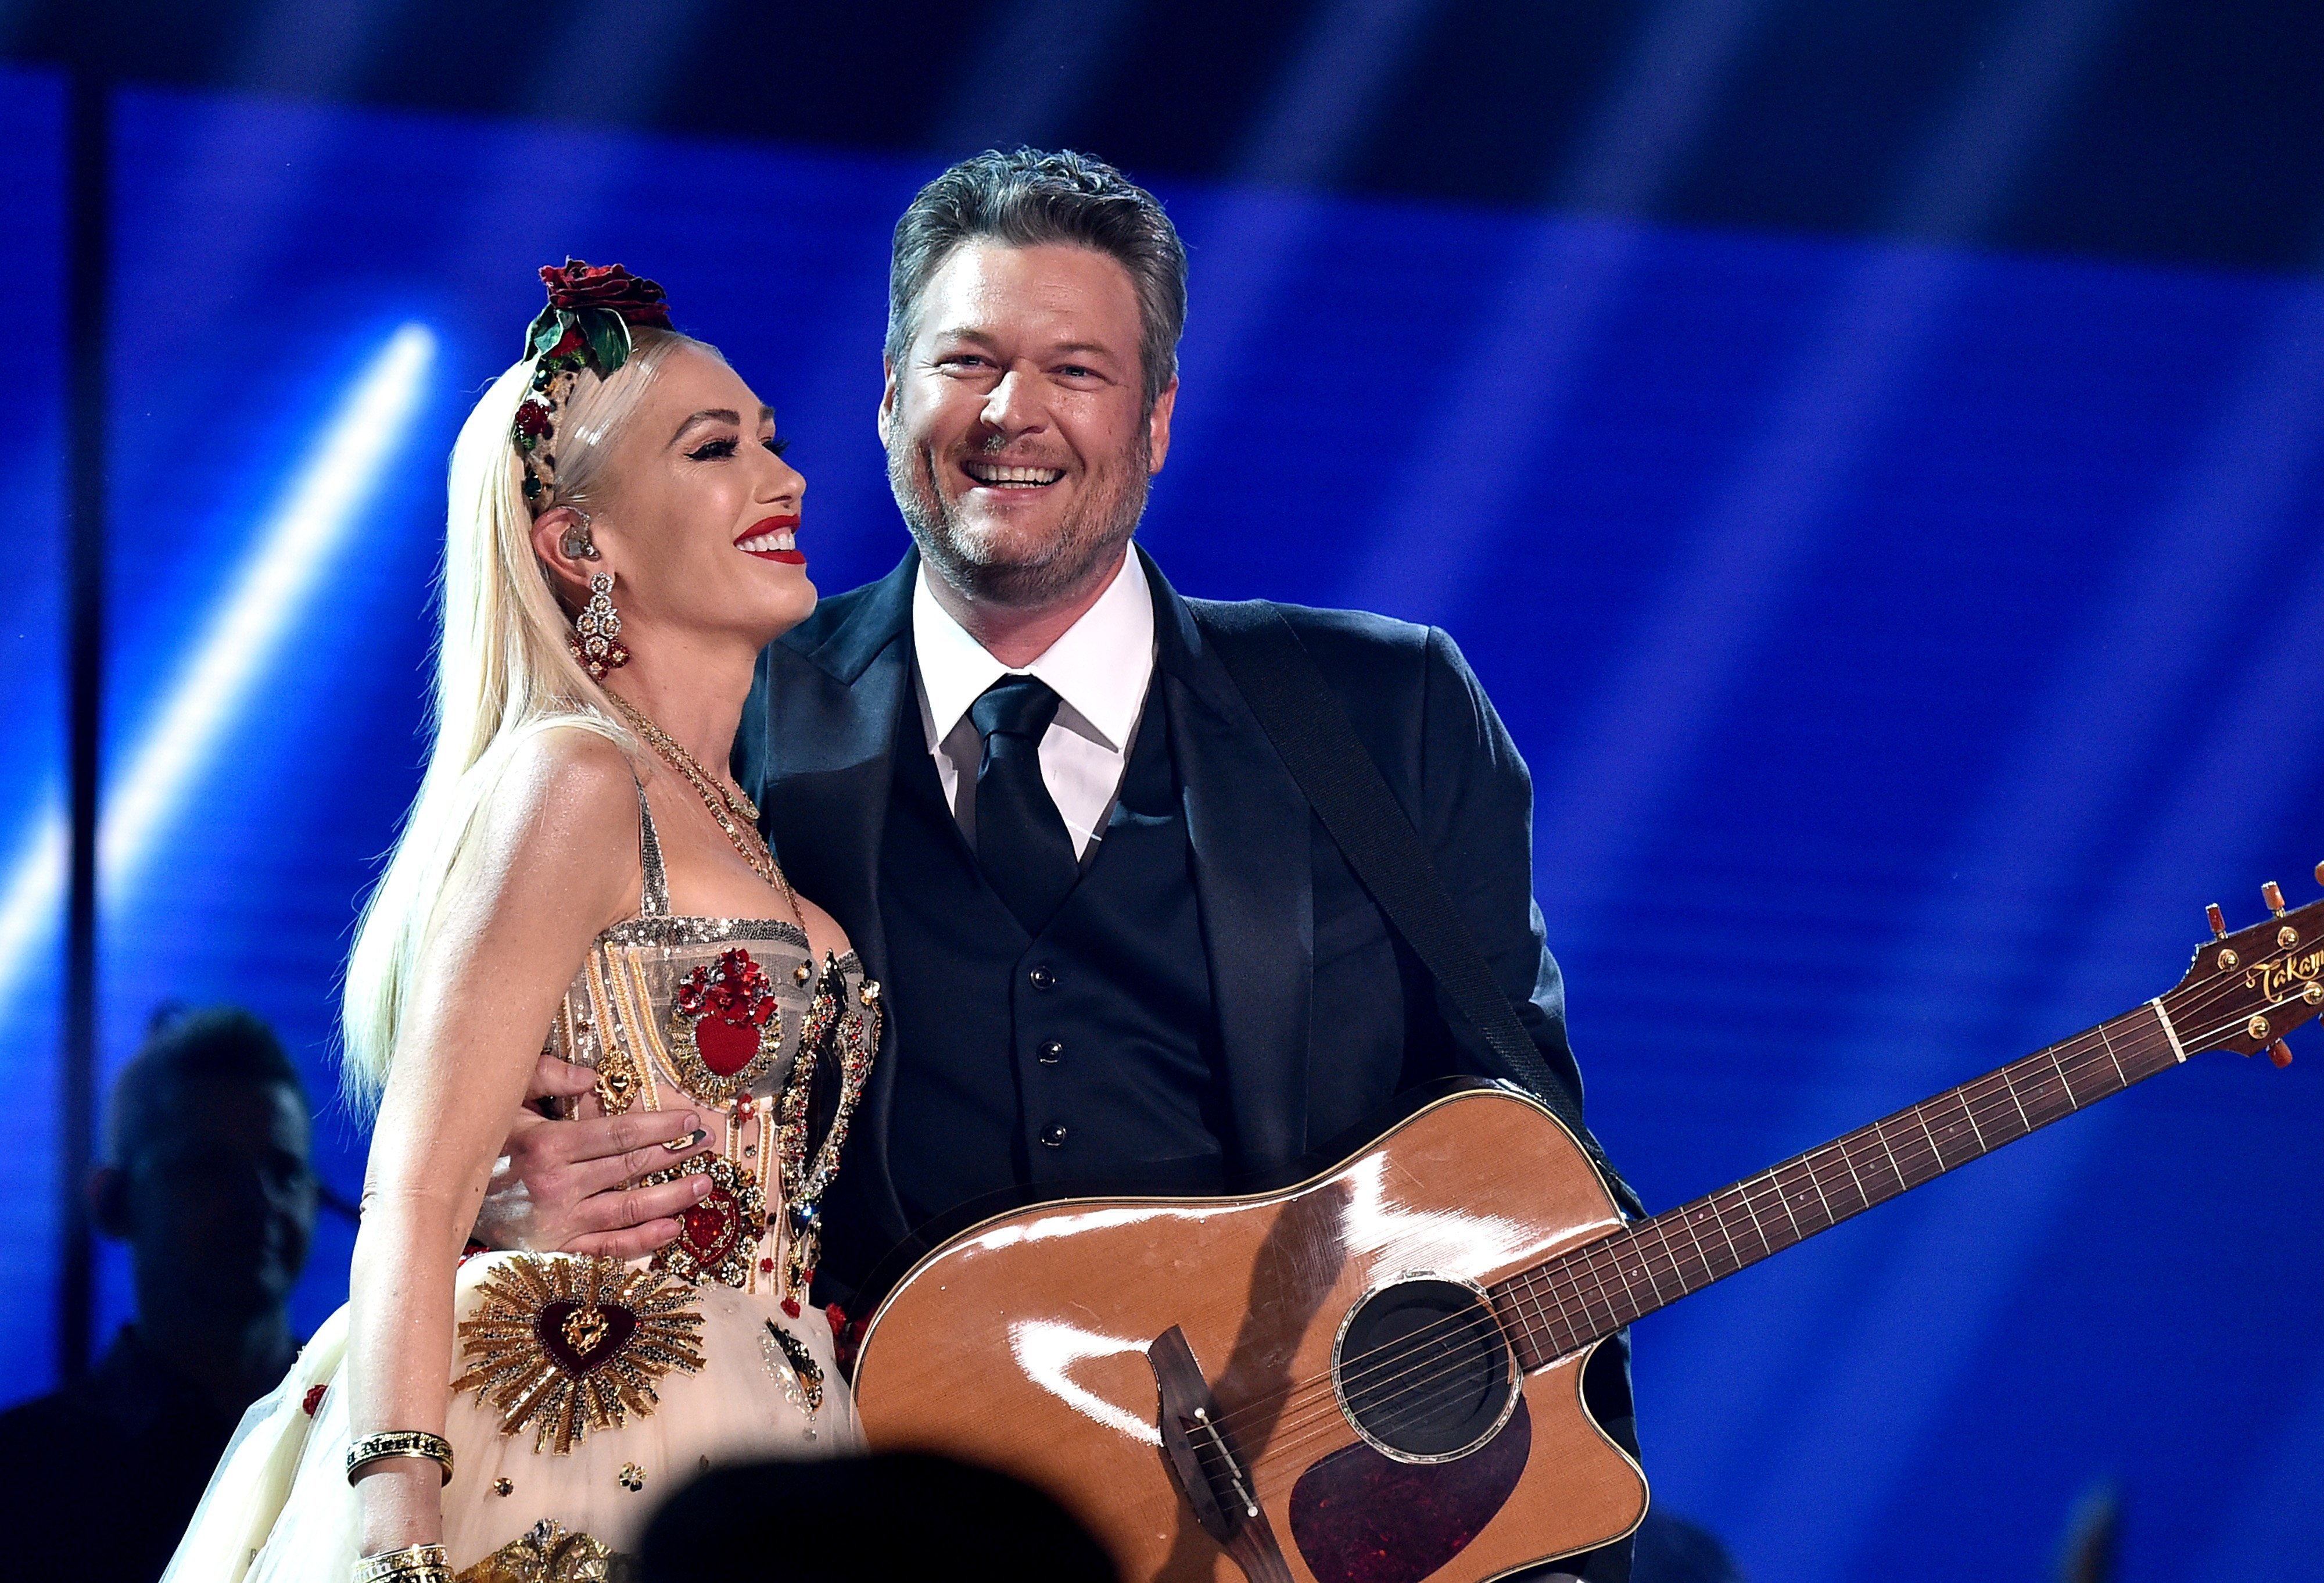 Blake Shelton and Gwen Stefani on January 26, 2020 in Los Angeles, California | Source: Getty Images